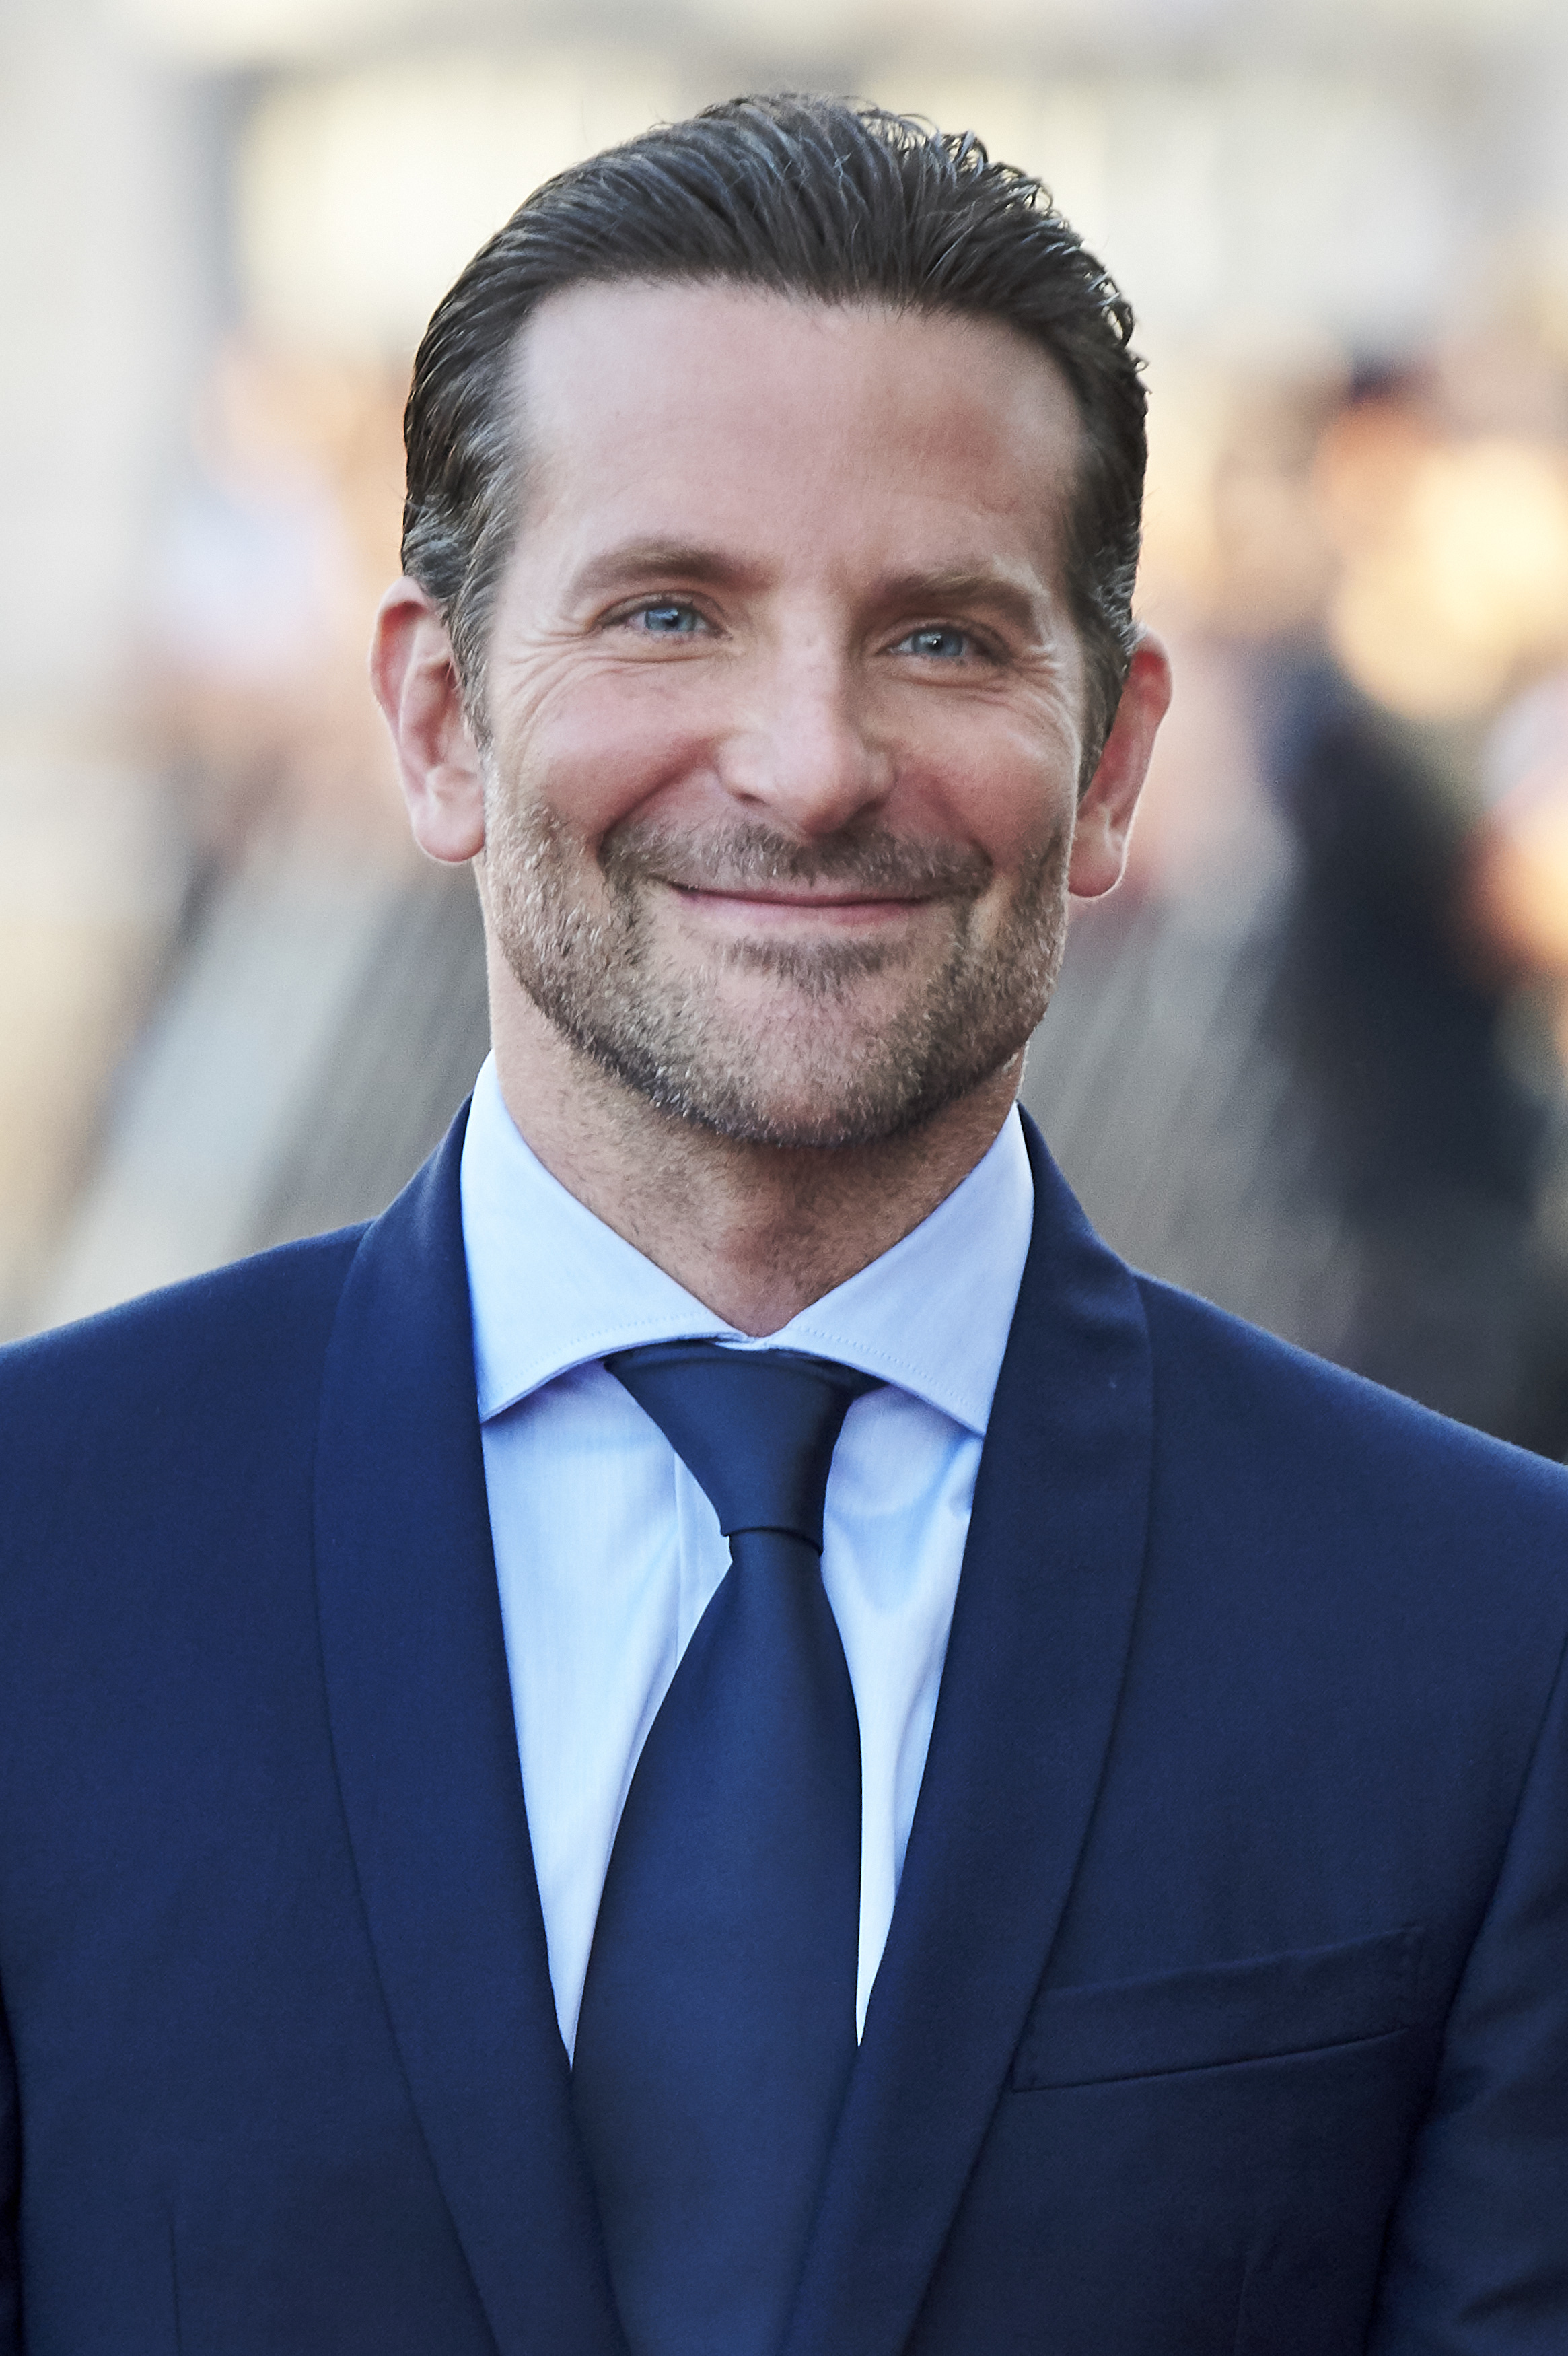 Actor Bradley Cooper attends the 'A Star Is Born' premiere during the 66th San Sebastian International Film Festival on September 29, 2018, in San Sebastian, Spain. | Source: Getty Images